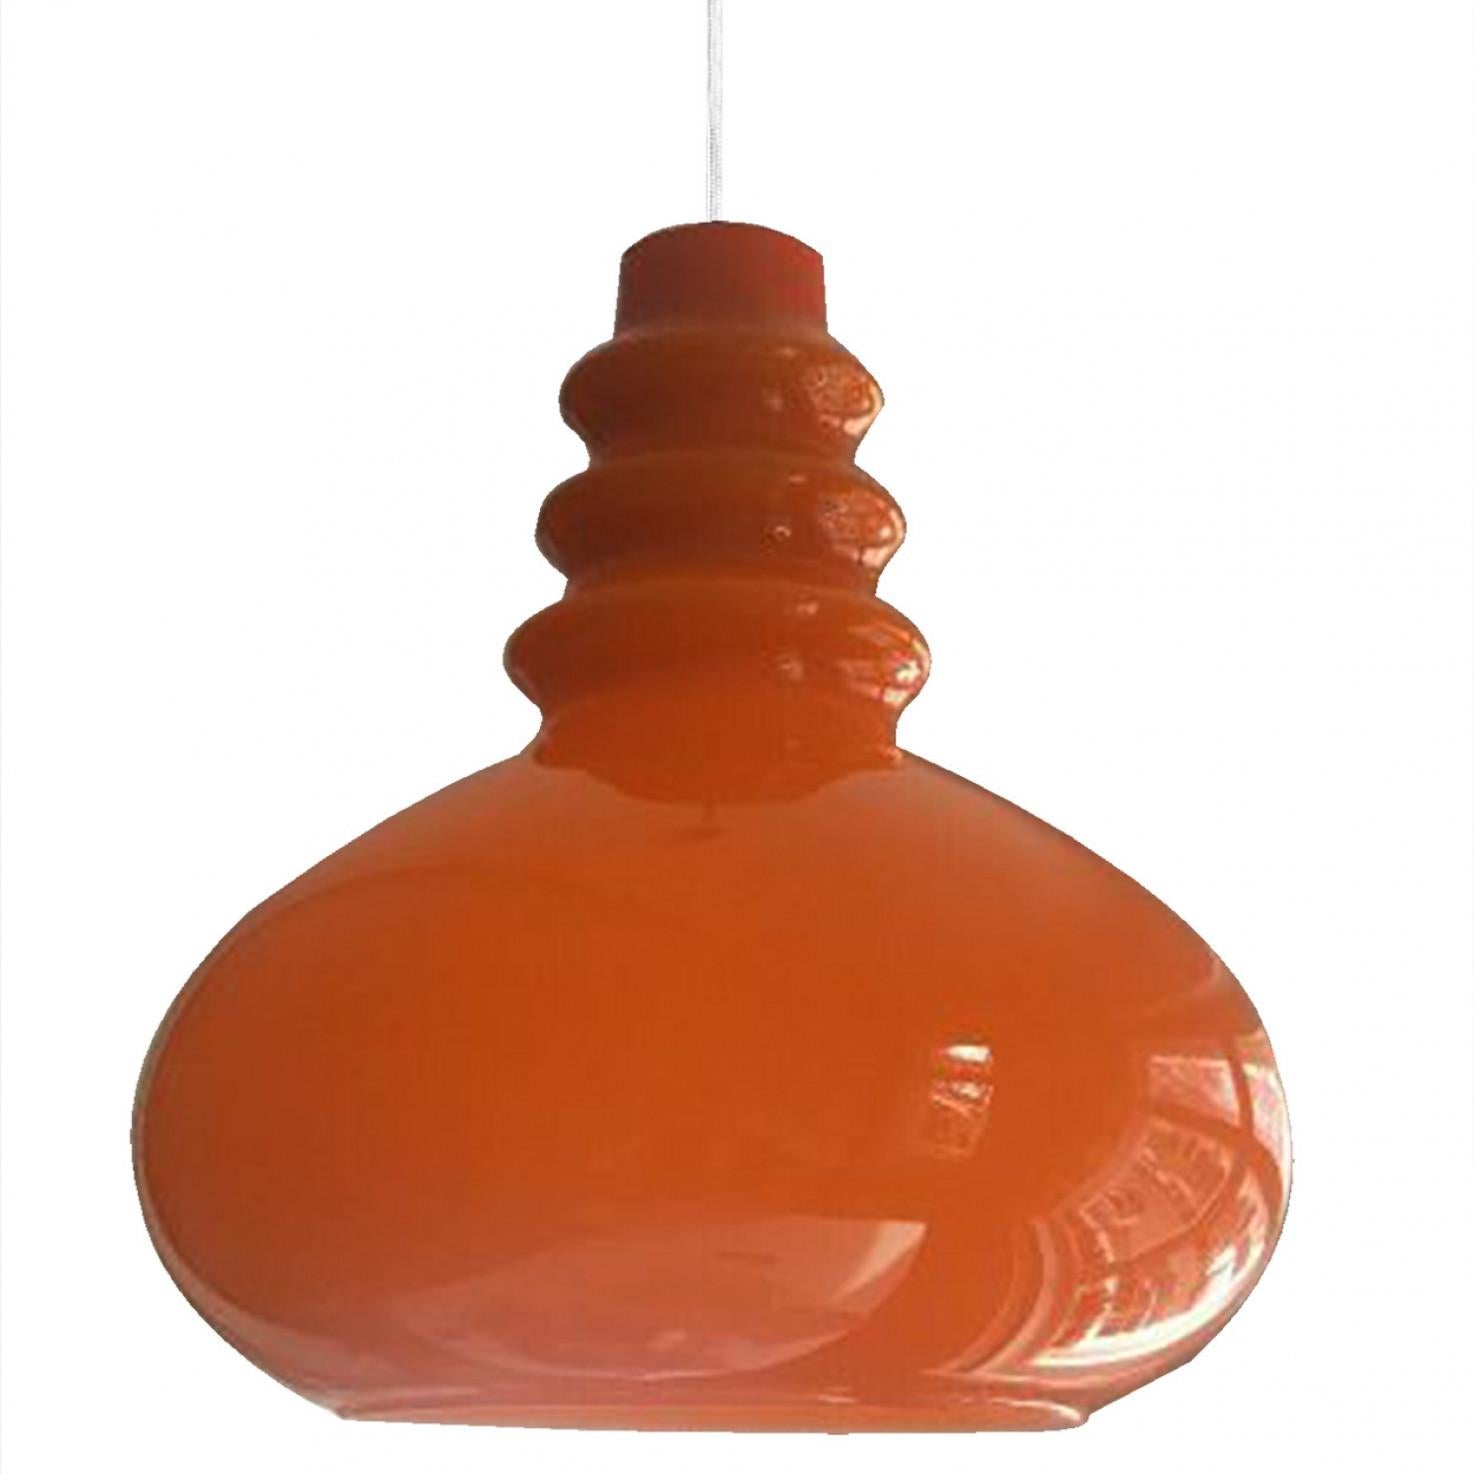 There’s something about orange that screams this particular era. And this 1970s pair of Peil & Putzler ceiling pendant lamps is very orange! Image 1 is the lamp with the light on.

The lovely shaped lampshade is made of a ‘cast opaque orange glass’